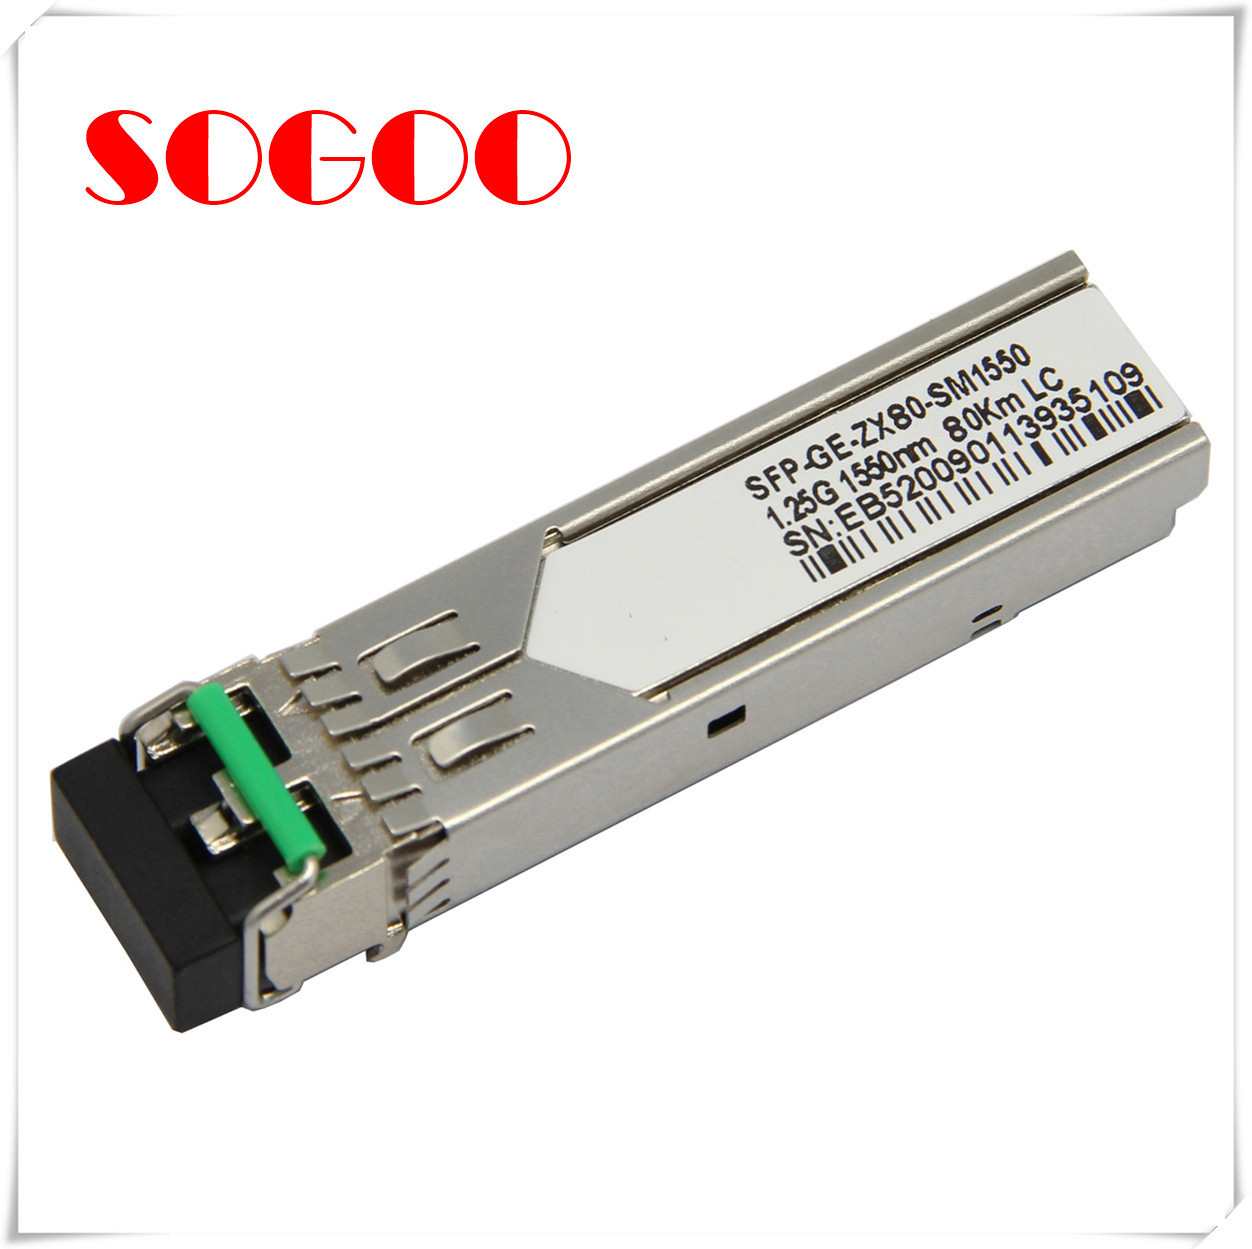 Wholesale 1000BASE-T Single Mode SFP Optical Transceiver / Module GLC-T from china suppliers